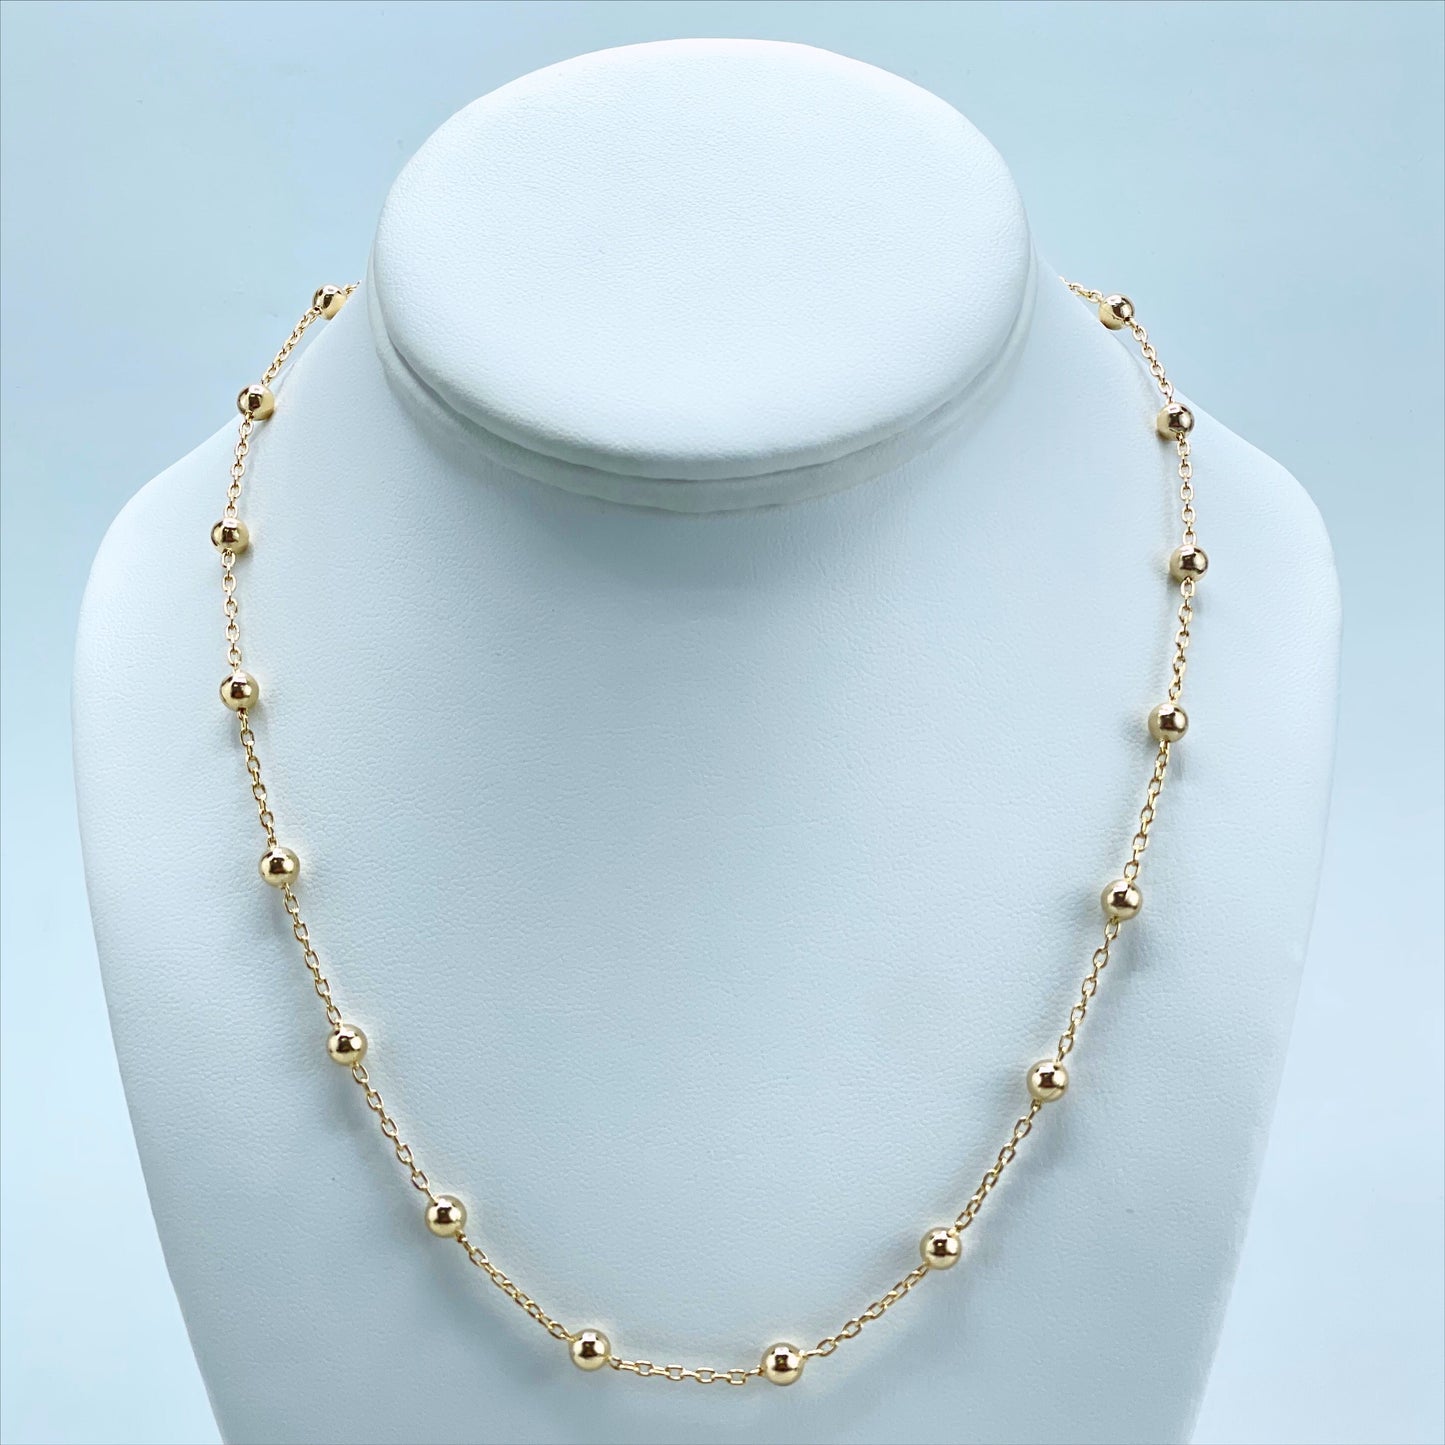 18k Gold Filled 2mm Paperclip Link with Linked Gold Beads, Necklace and Bracelet Set, Wholesale Jewelry Making Supplies